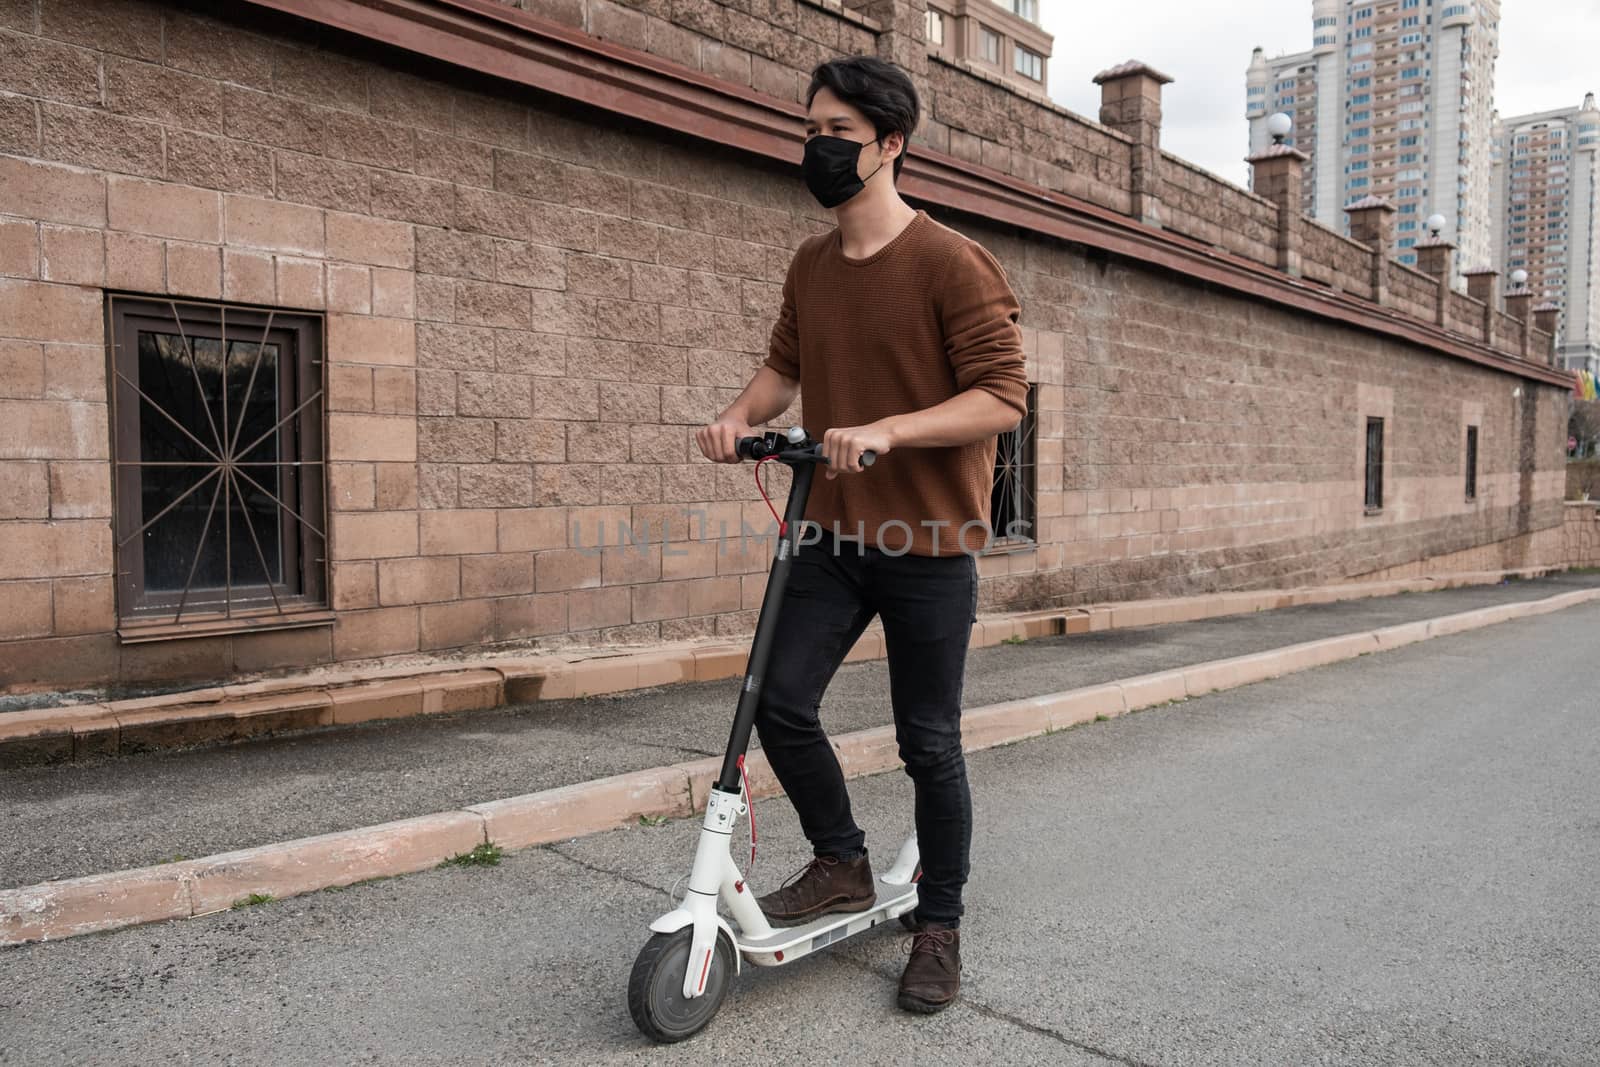 Young man riding a scooter in the city